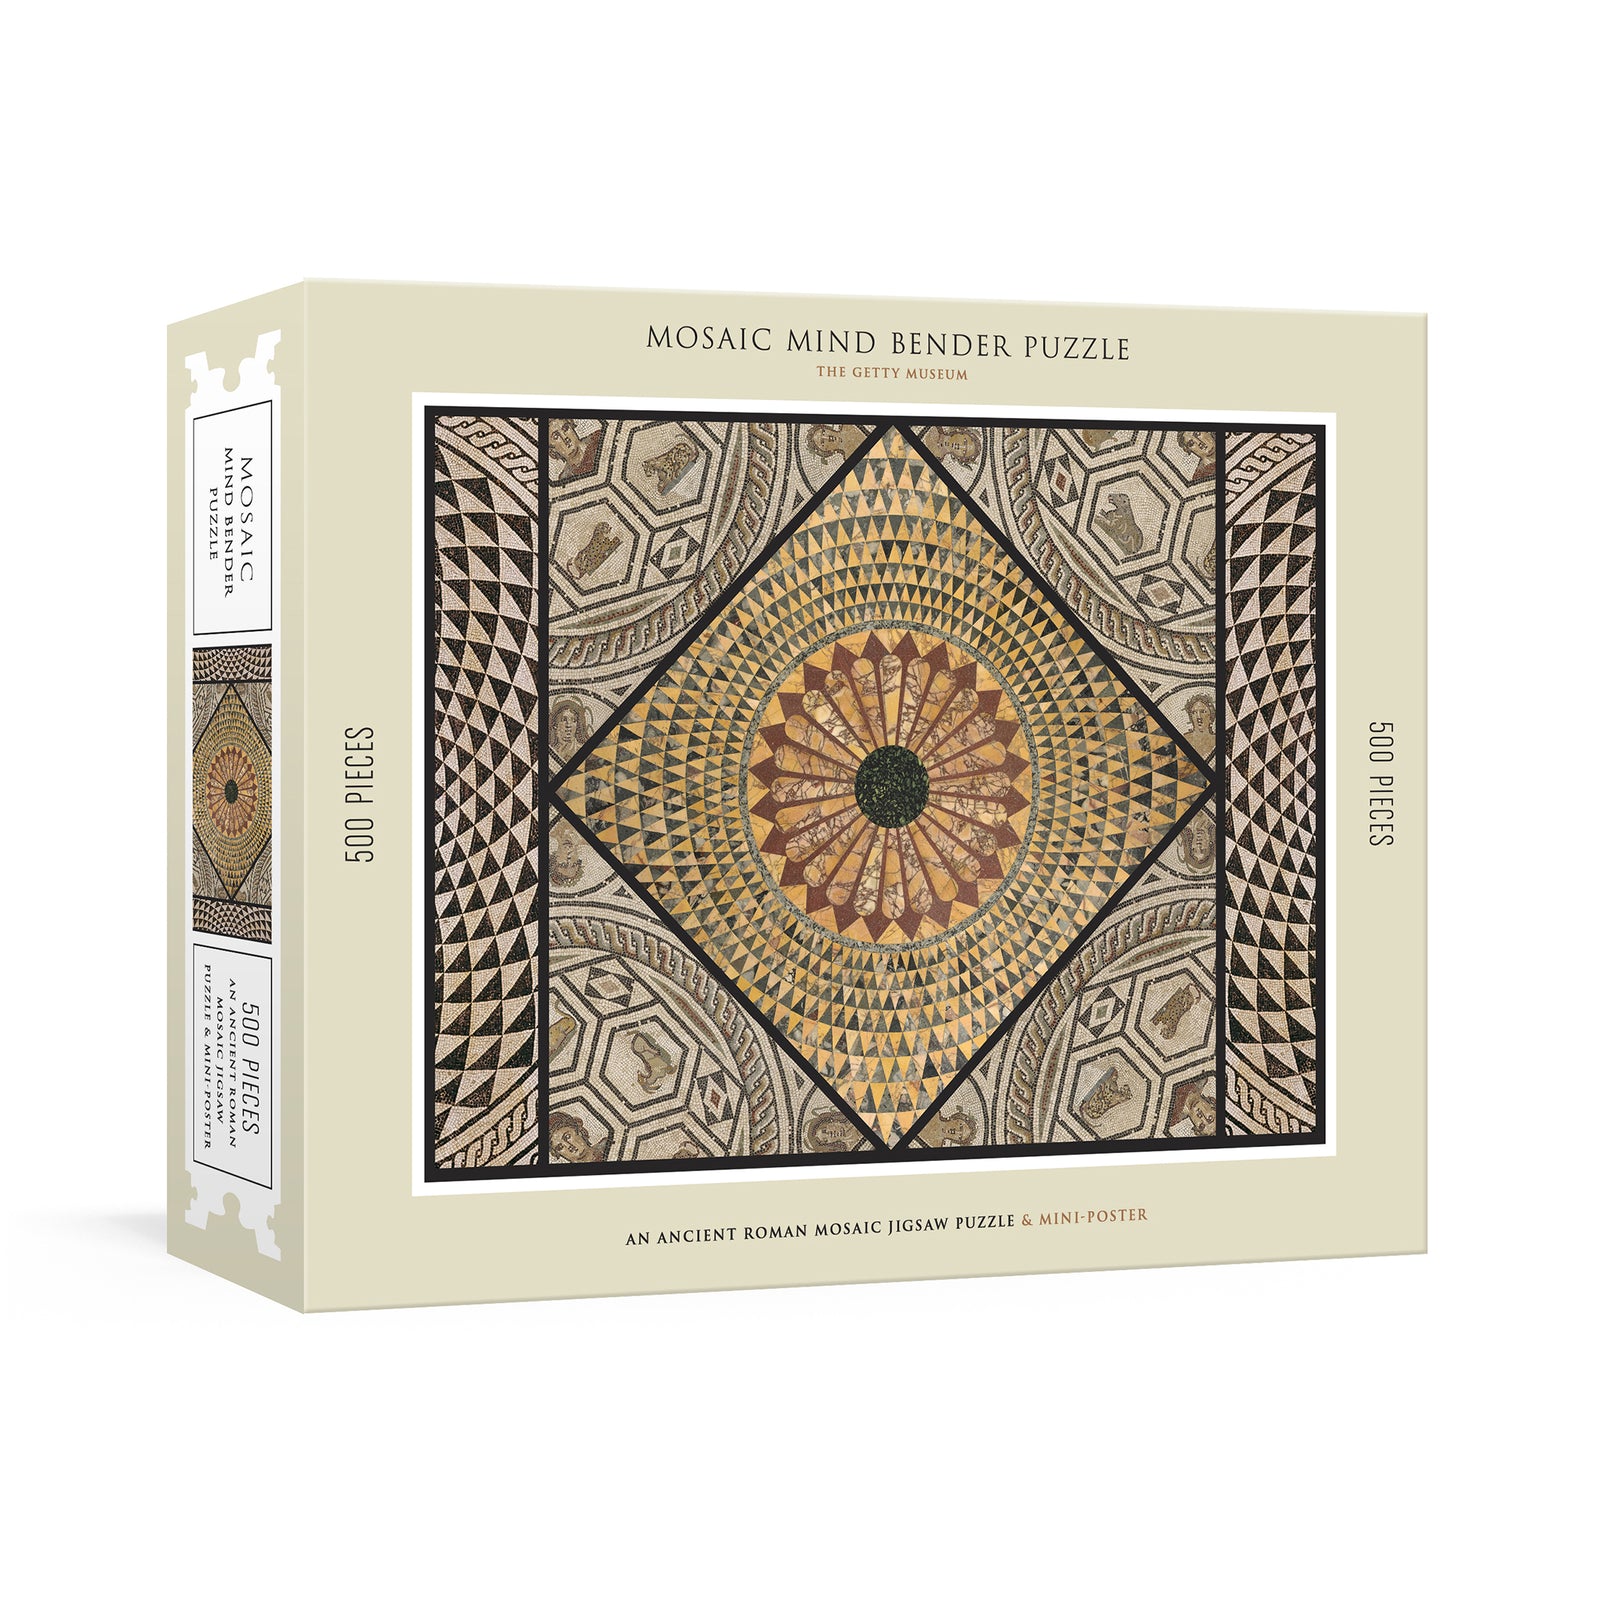 Museum Collection Puzzle Set - Getty Museum Store